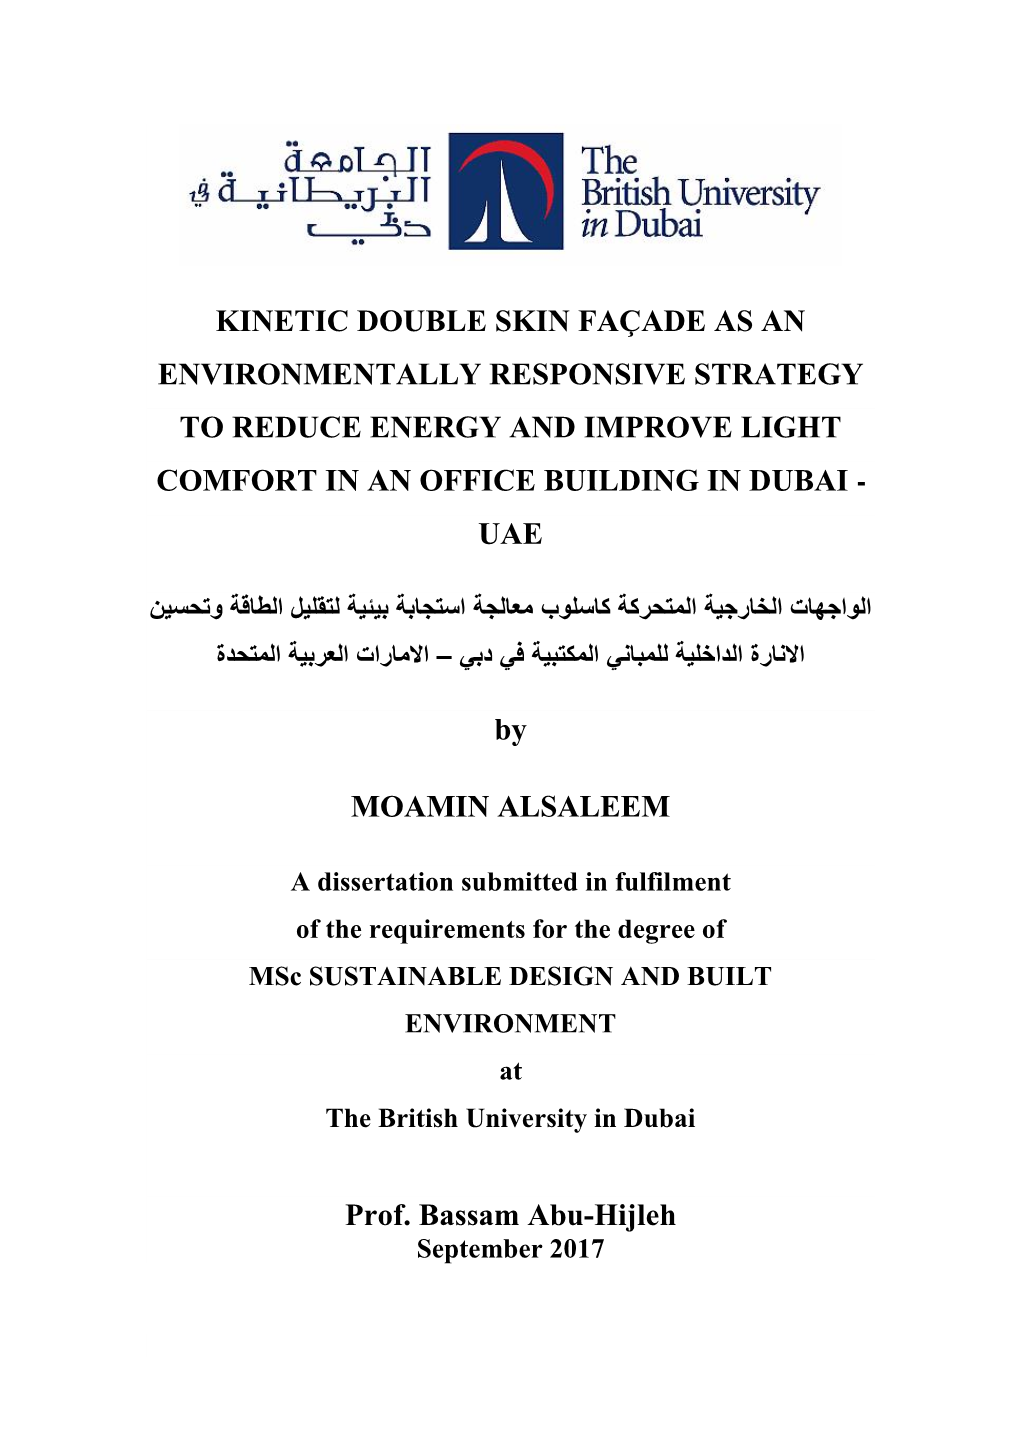 Kinetic Double Skin Façade As an Environmentally Responsive Strategy to Reduce Energy and Improve Light Comfort in an Office Building in Dubai - Uae